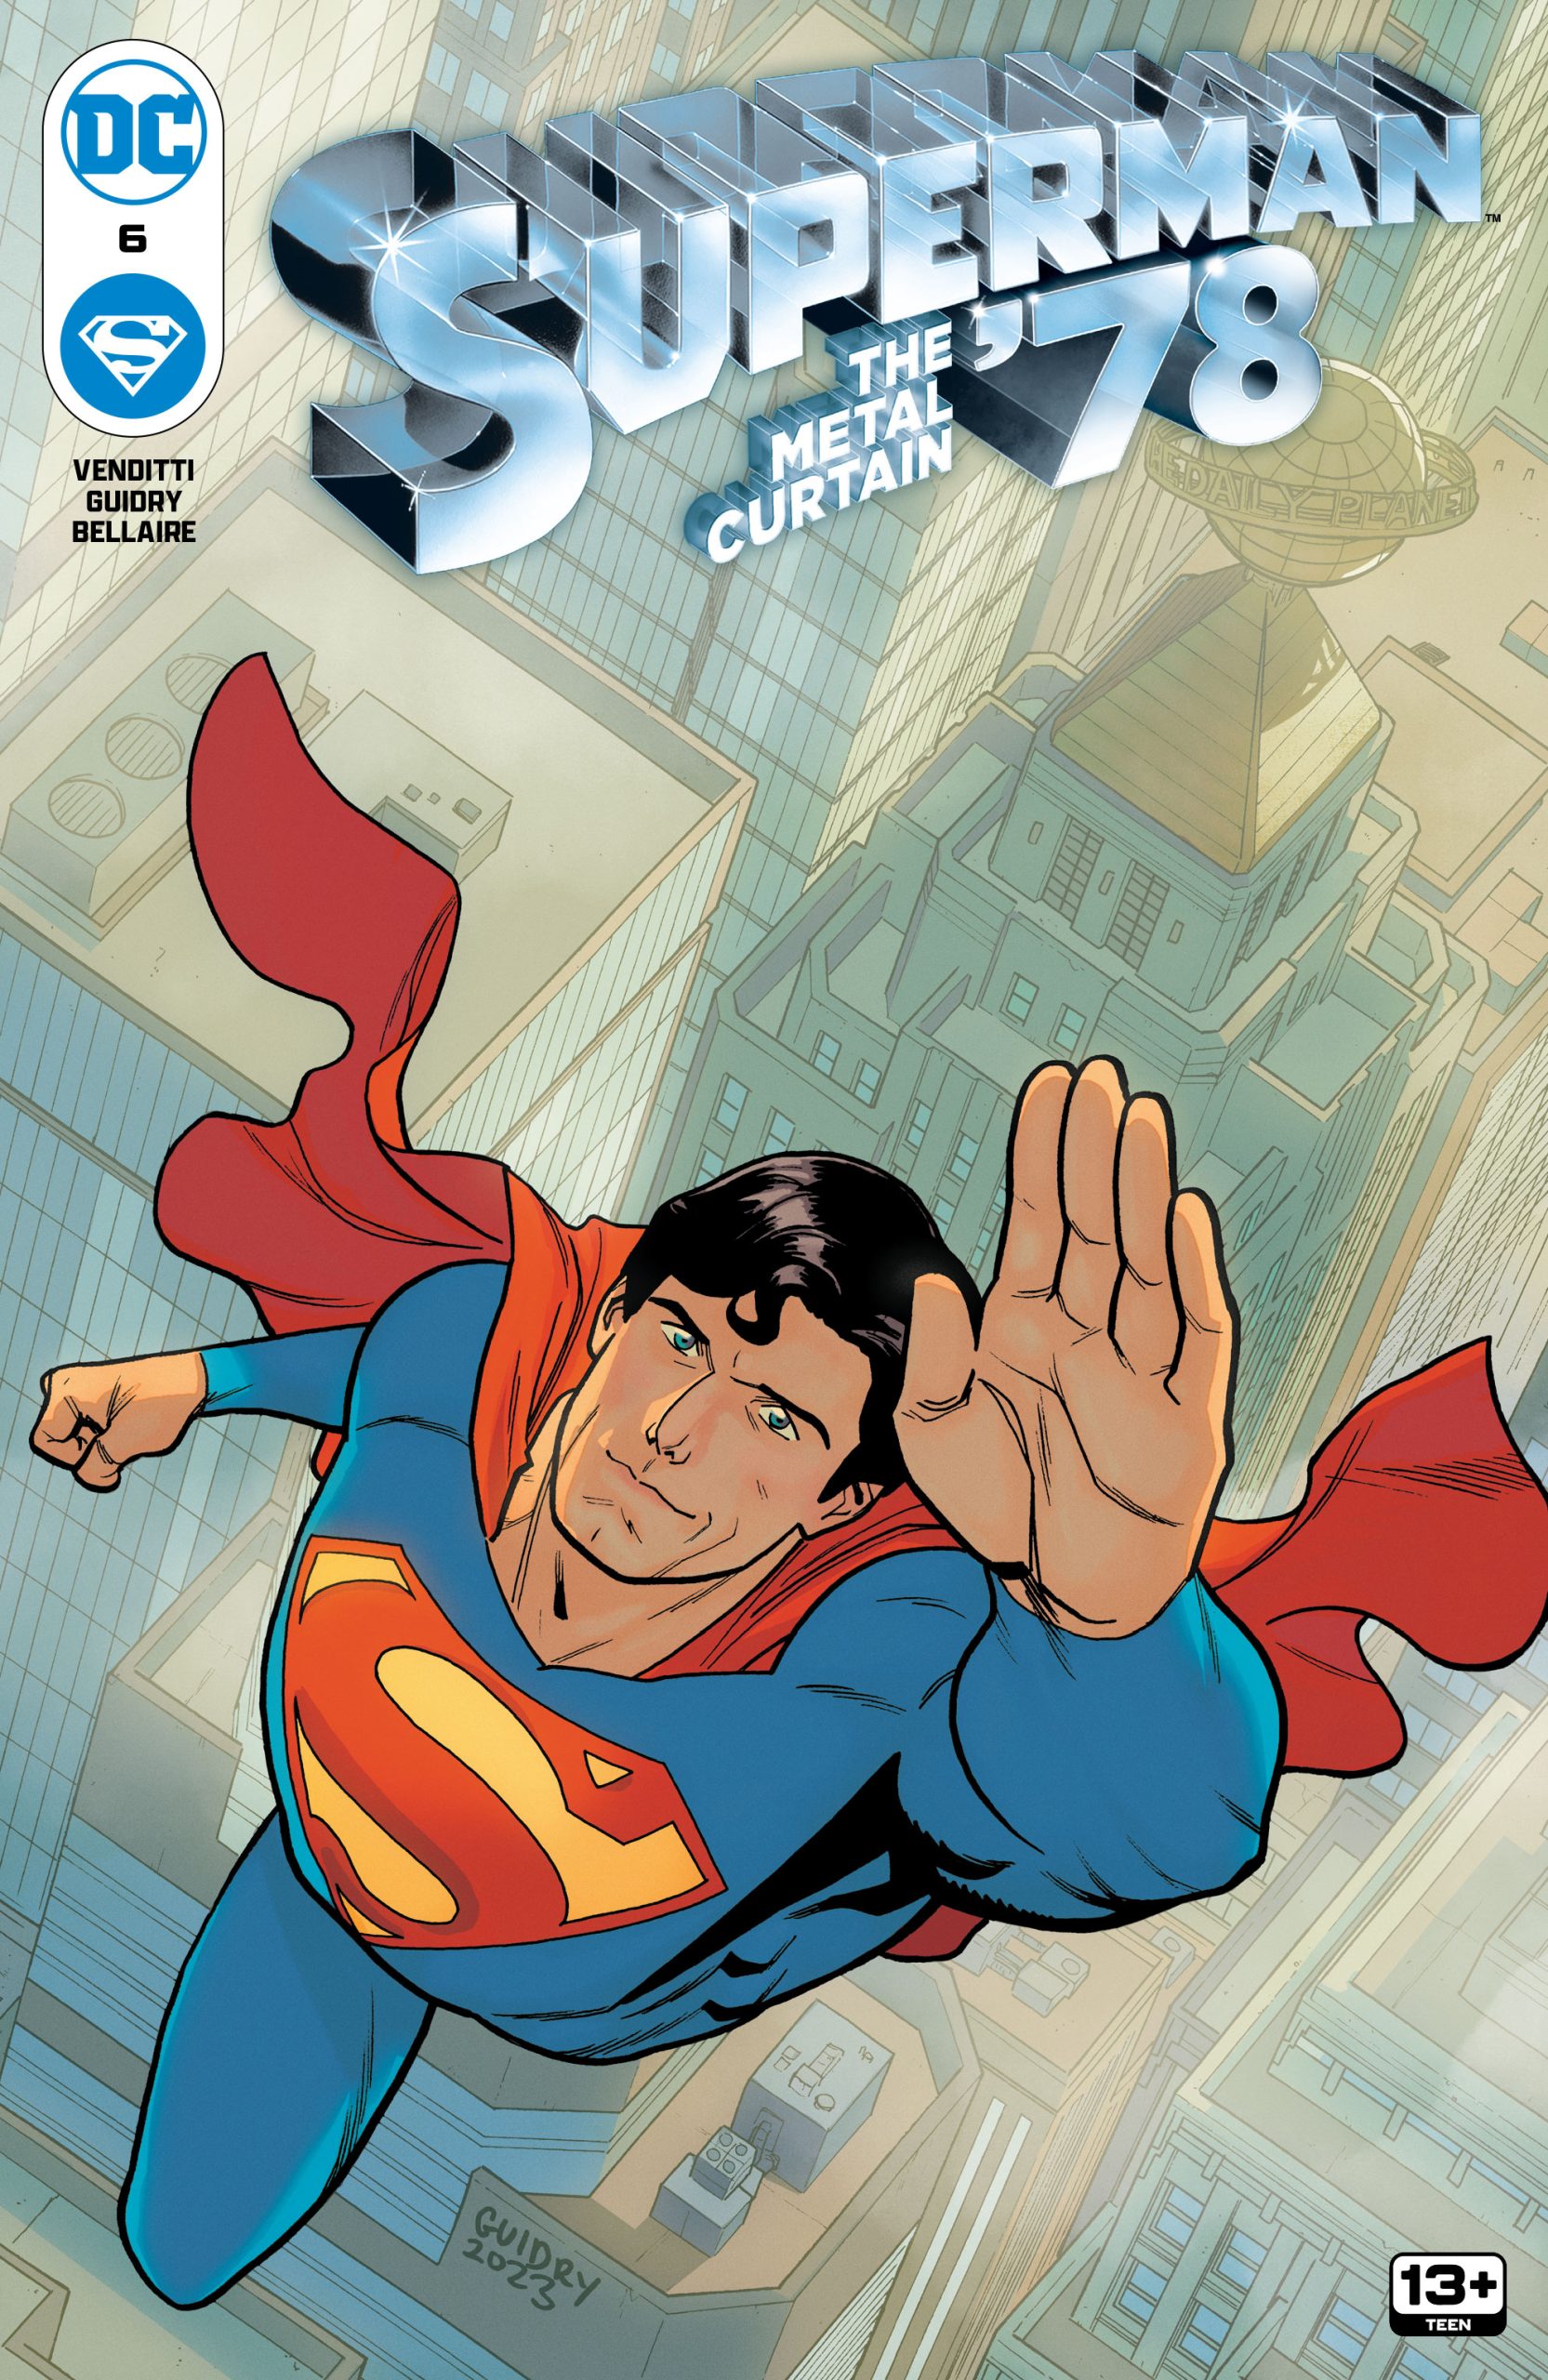 DC Preview: Superman '78: The Metal Curtain #6